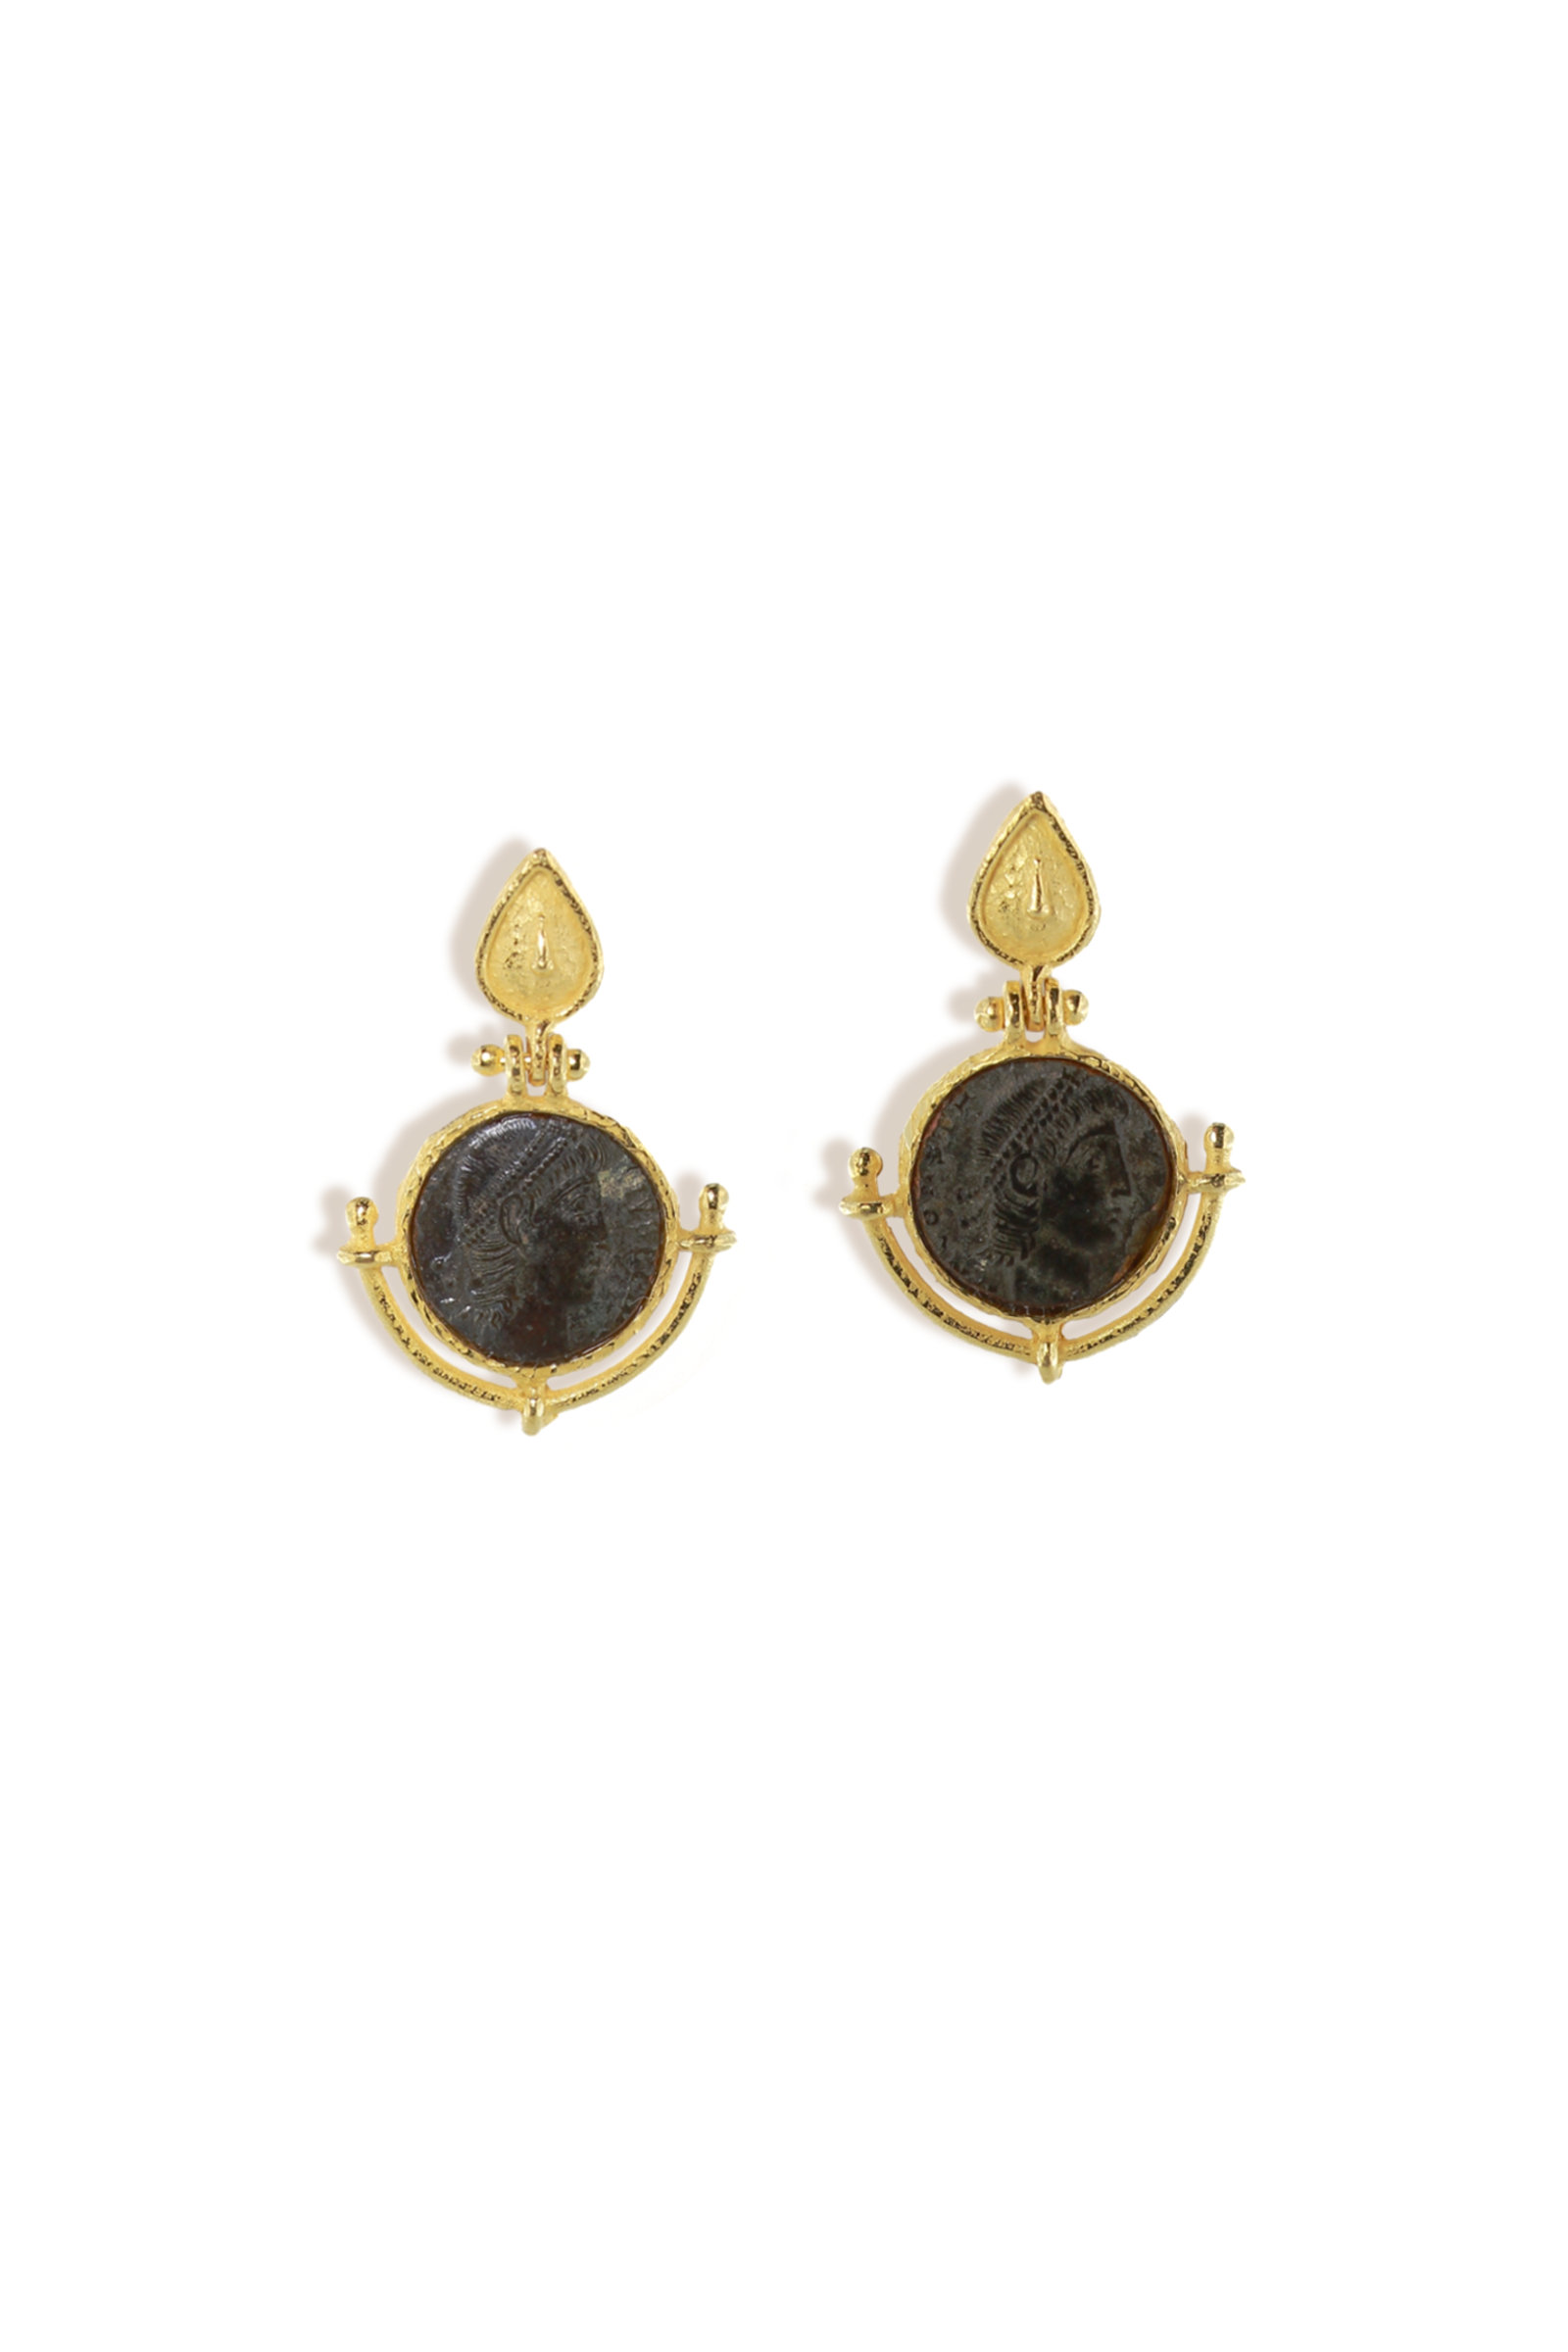 SD602B-18-Kt-Yellow-Gold-Earrings-with-Roman-Coins-1